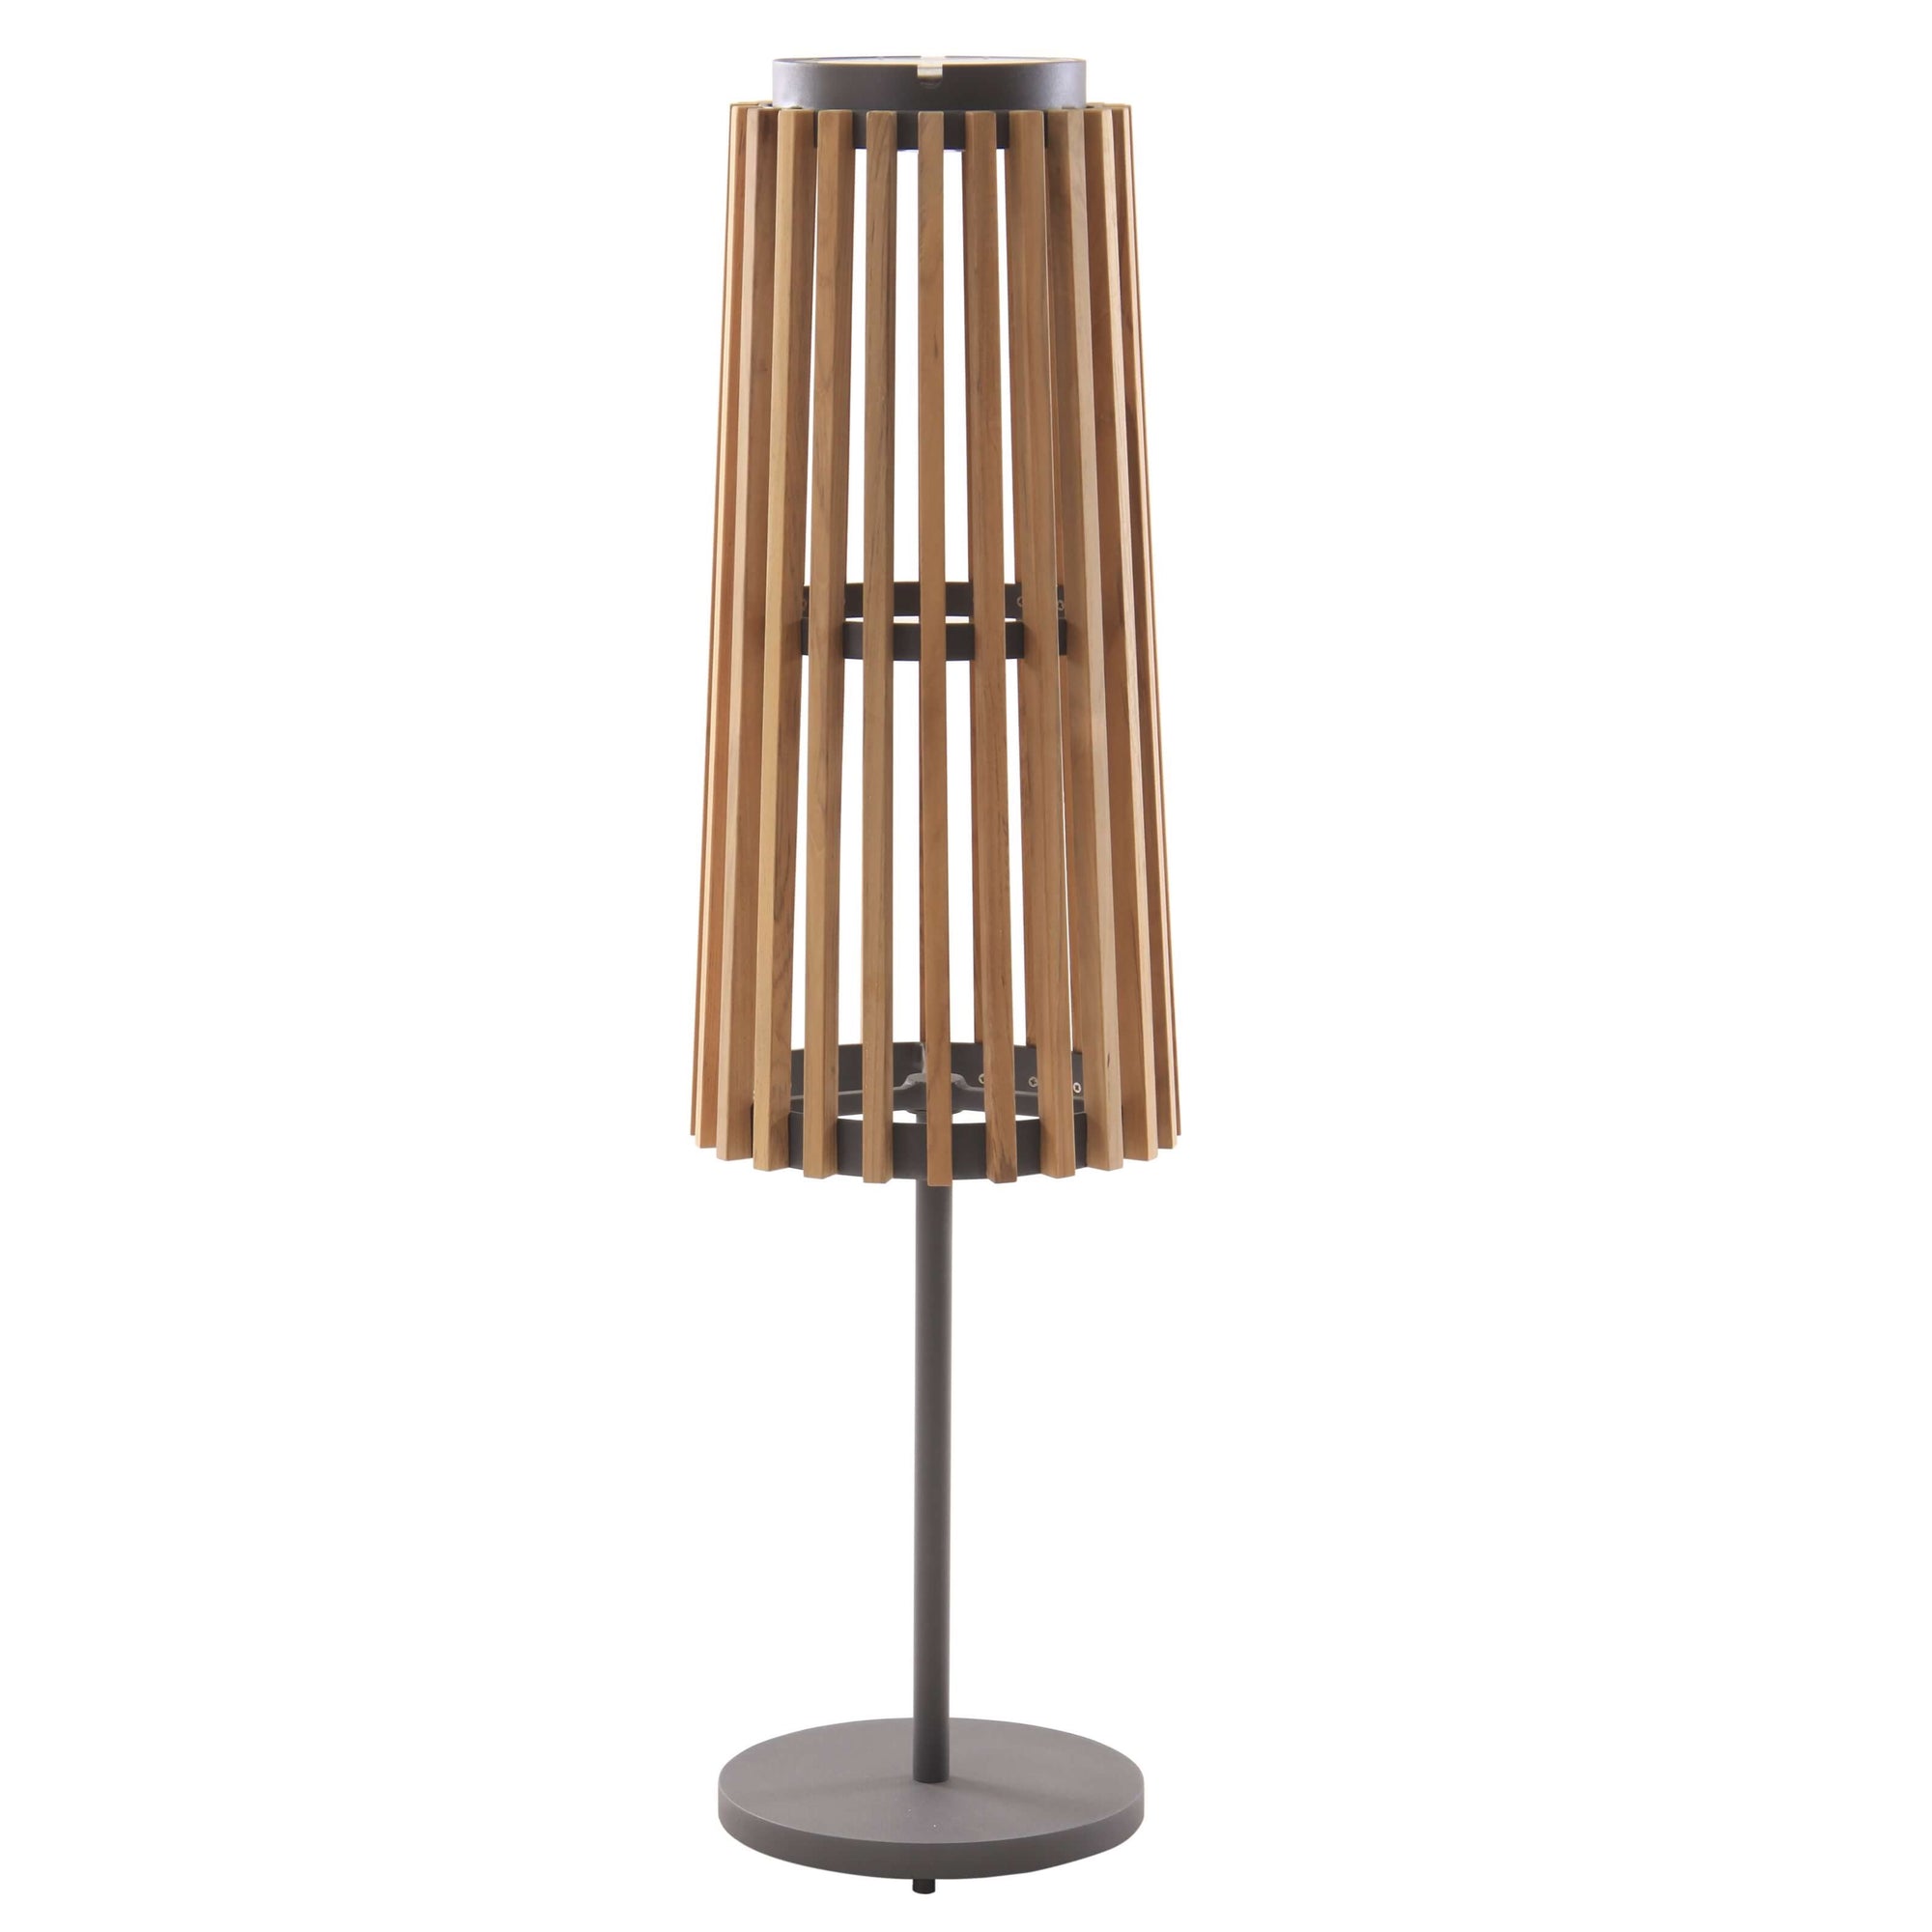 Solare is a graphite aluminum or  Stainless Steel outdoor floor lamp with Ø 26 lampshade in Teak slats.‎ LED characteristics: 13200mAh - 2700k - 600lm Charging: solar - USB